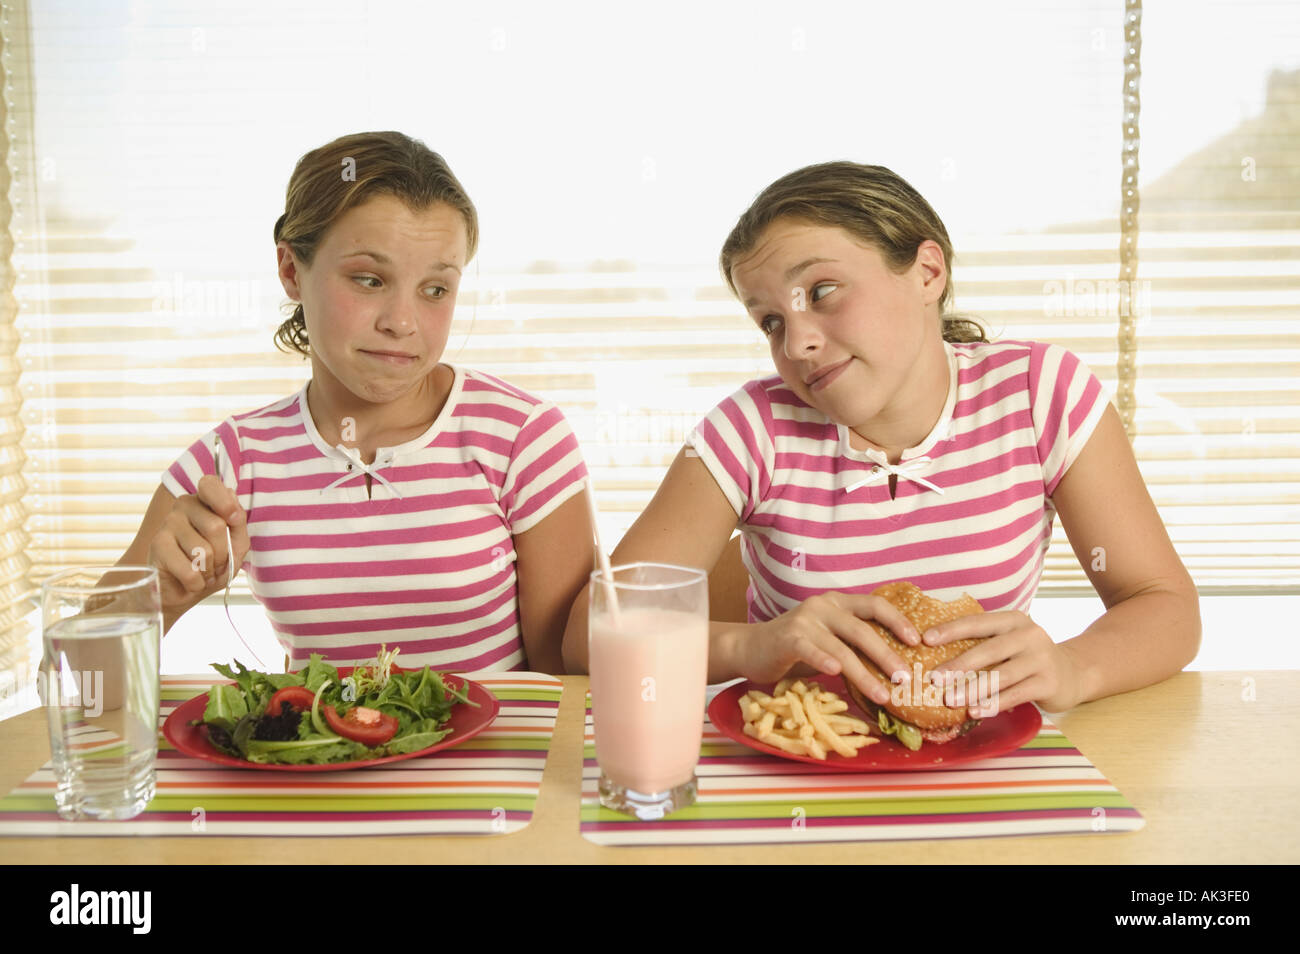 Twin teenagers eating different lunches Stock Photo